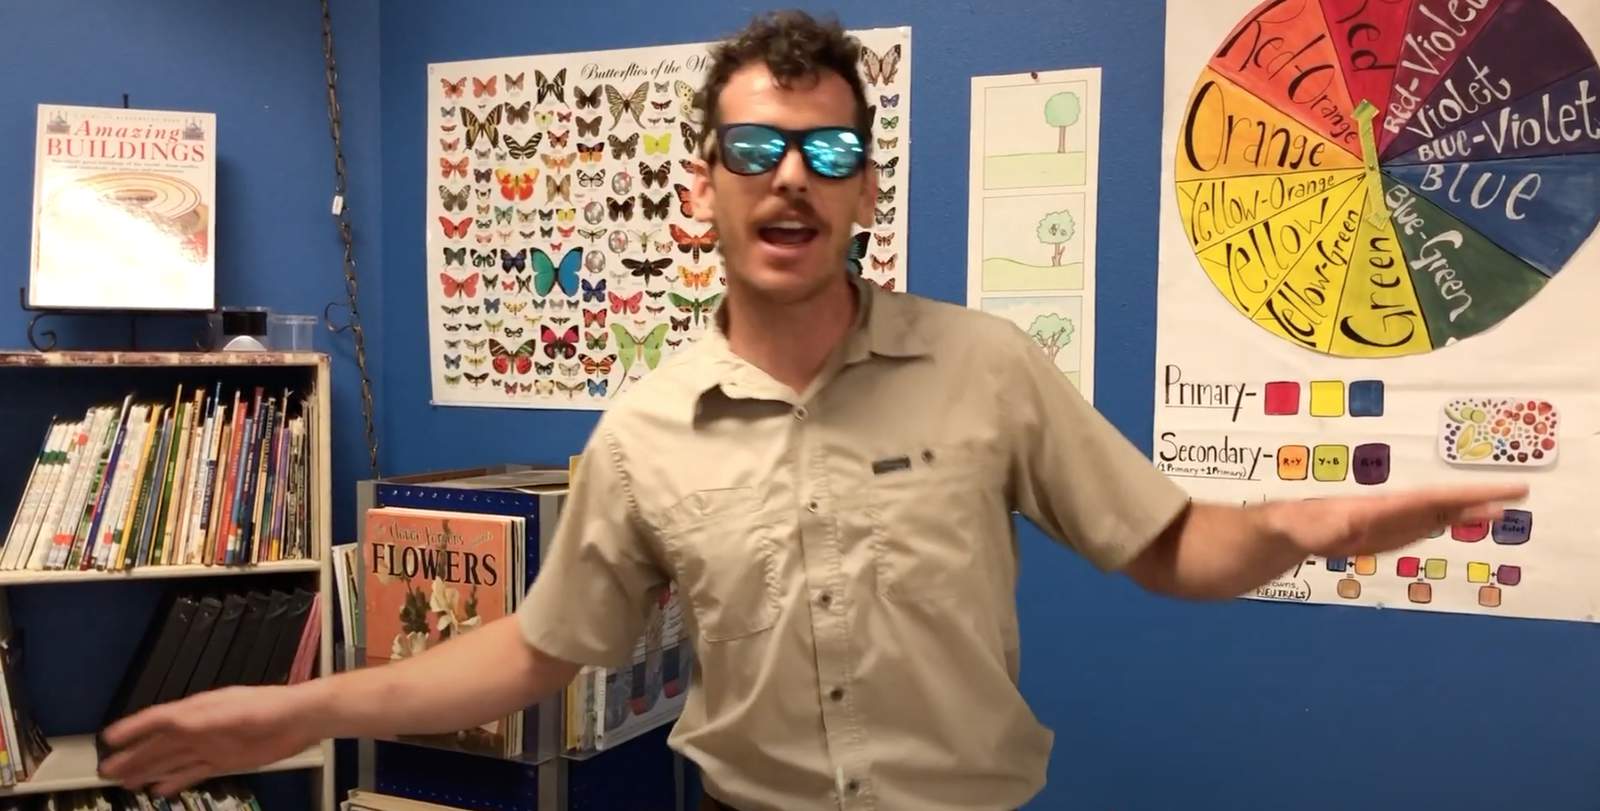 San Antonio elementary art teacher creates rap video to help transition, give introduction to students